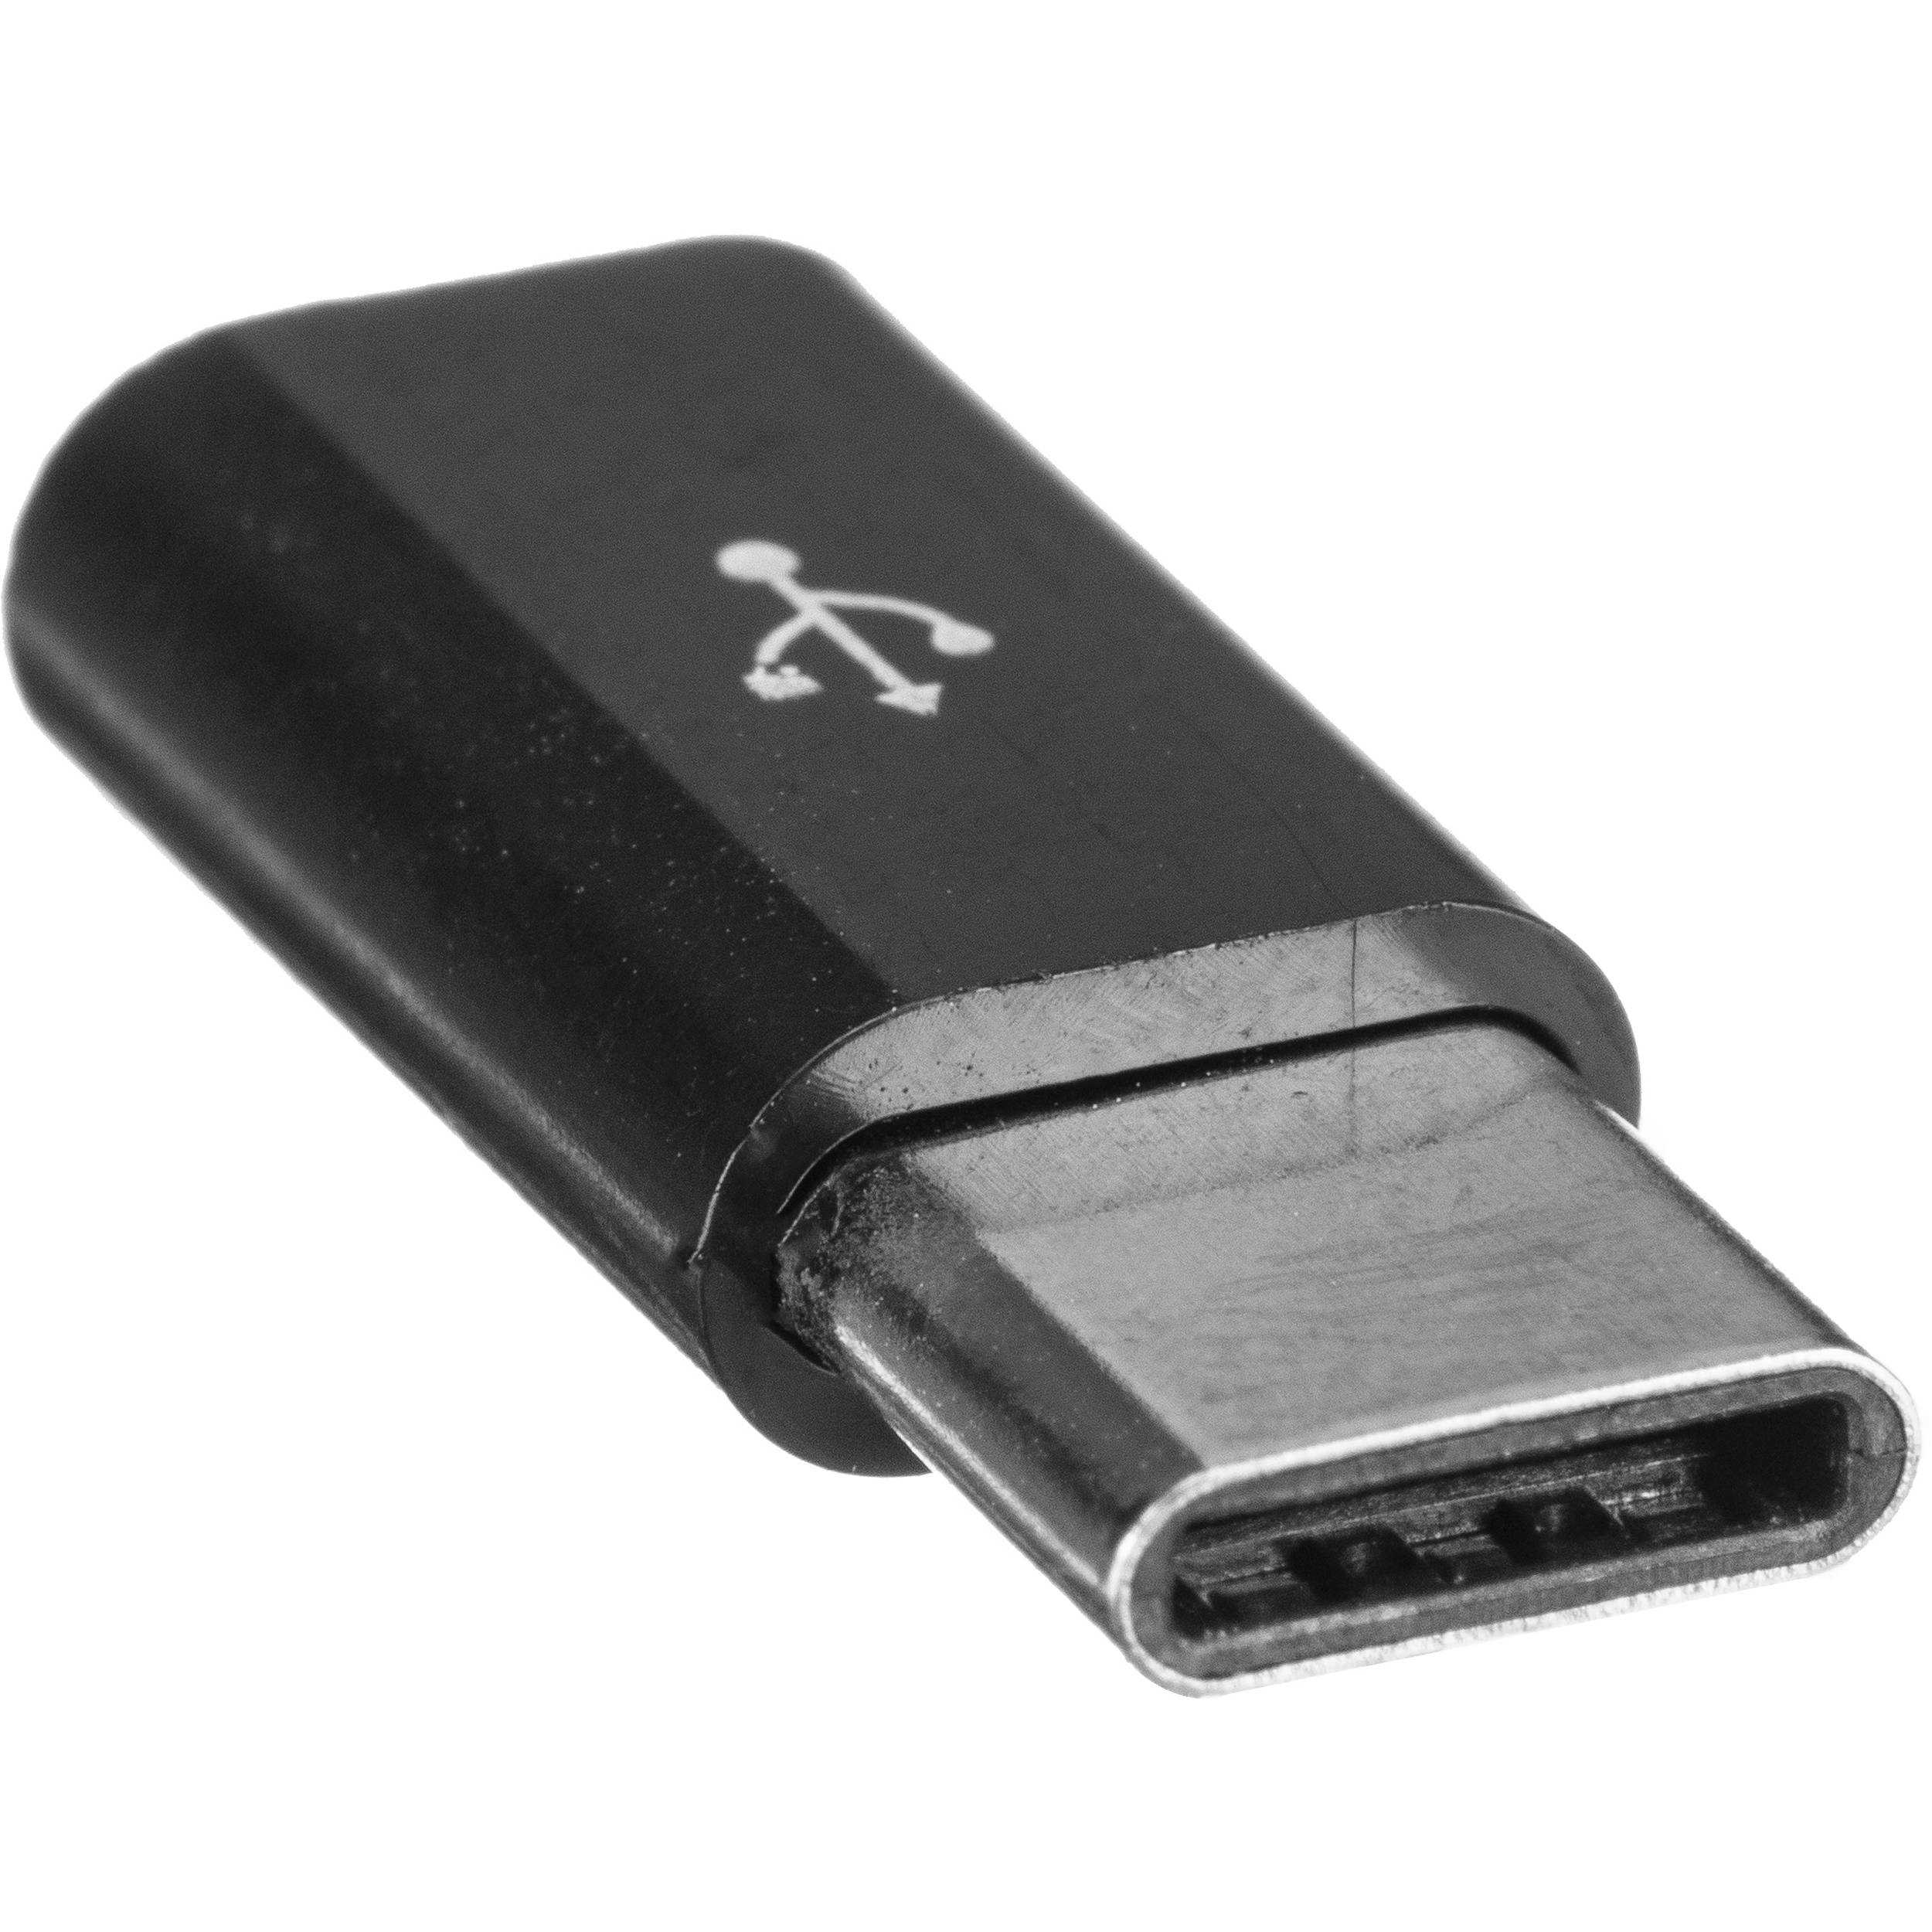 micro usb to type a